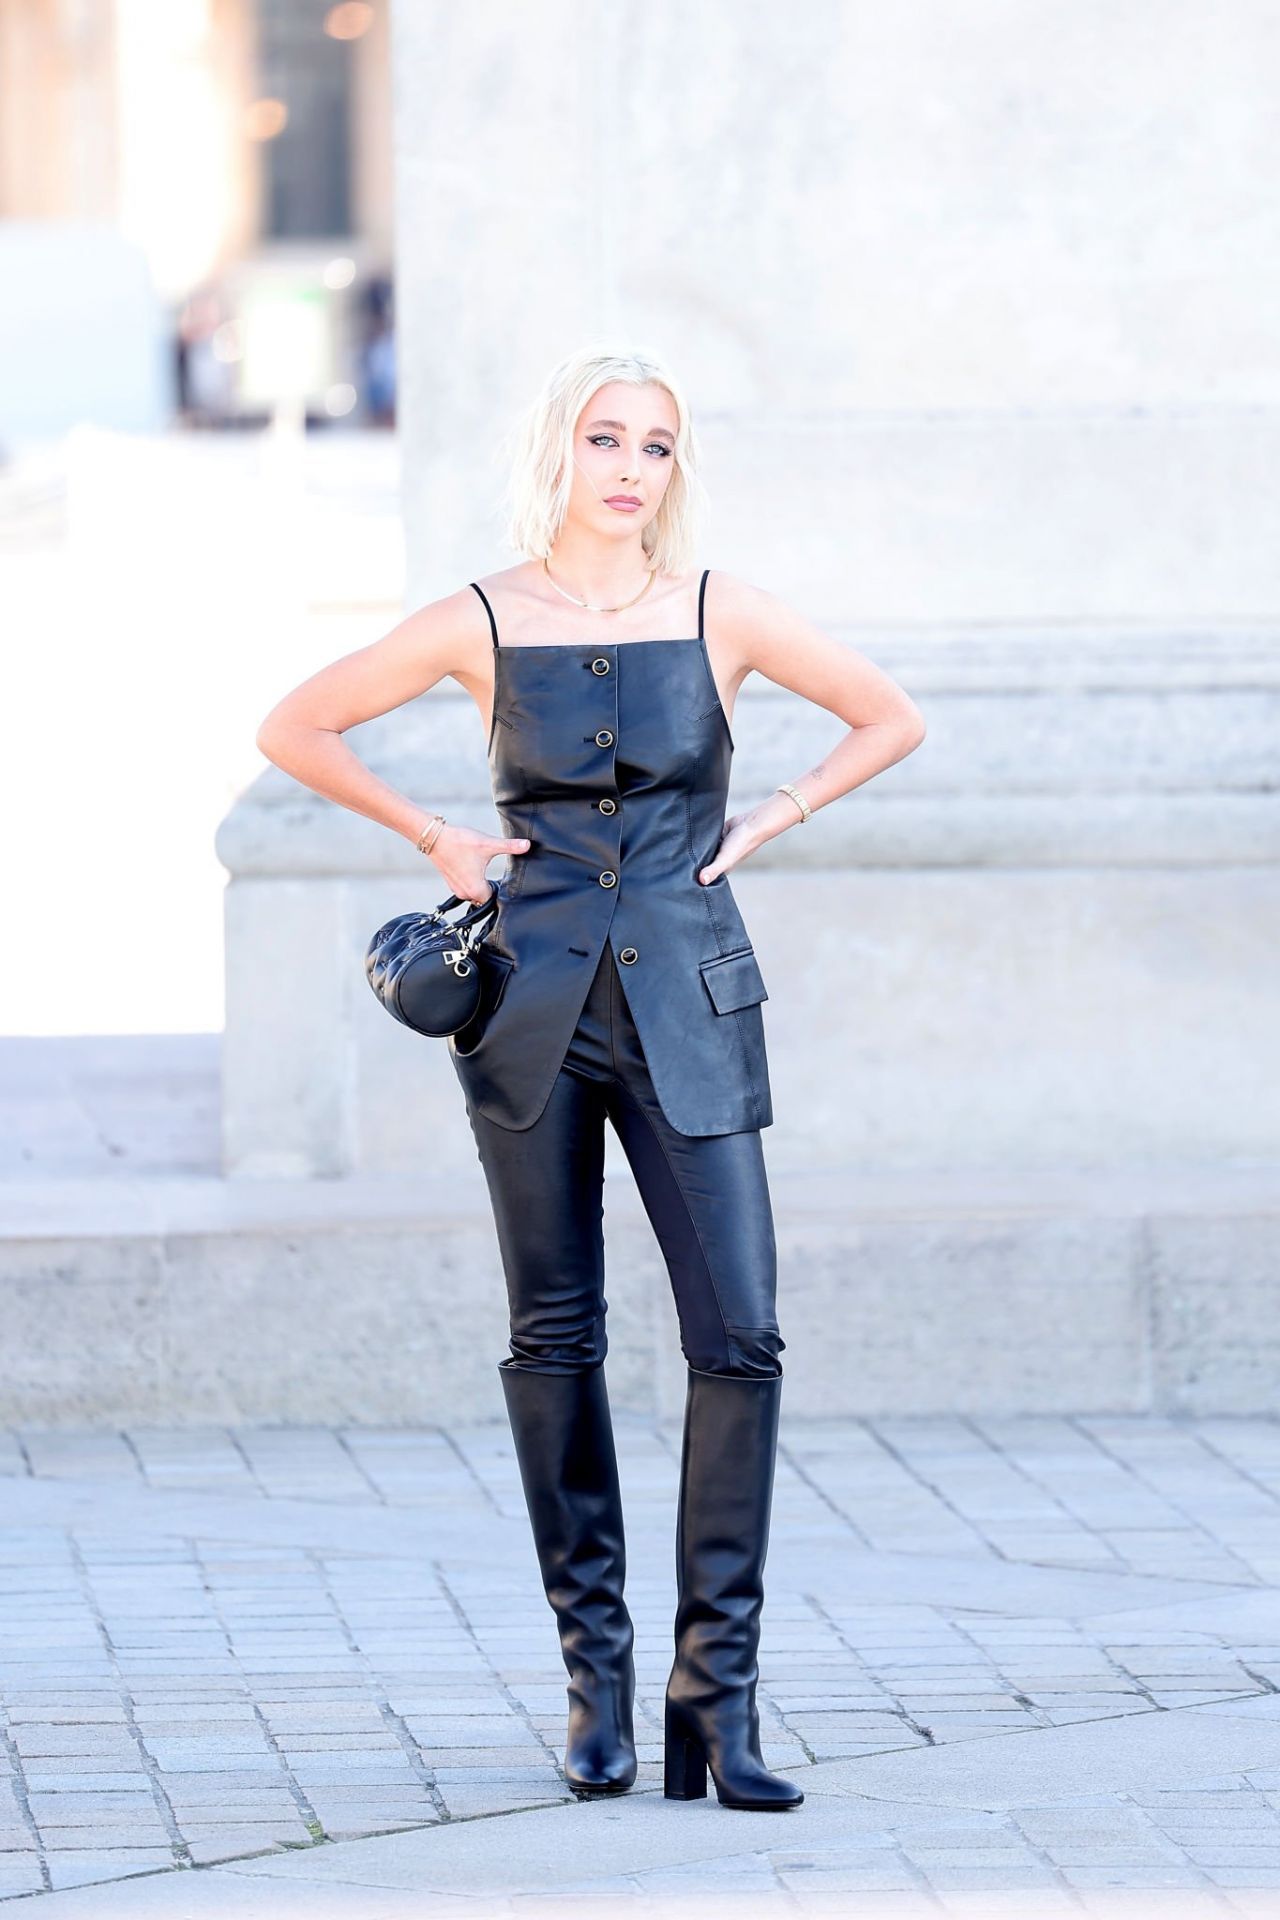 Emma Chamberlain Reps Louis Vuitton In Mini Skirt And Black Boots –  Footwear News